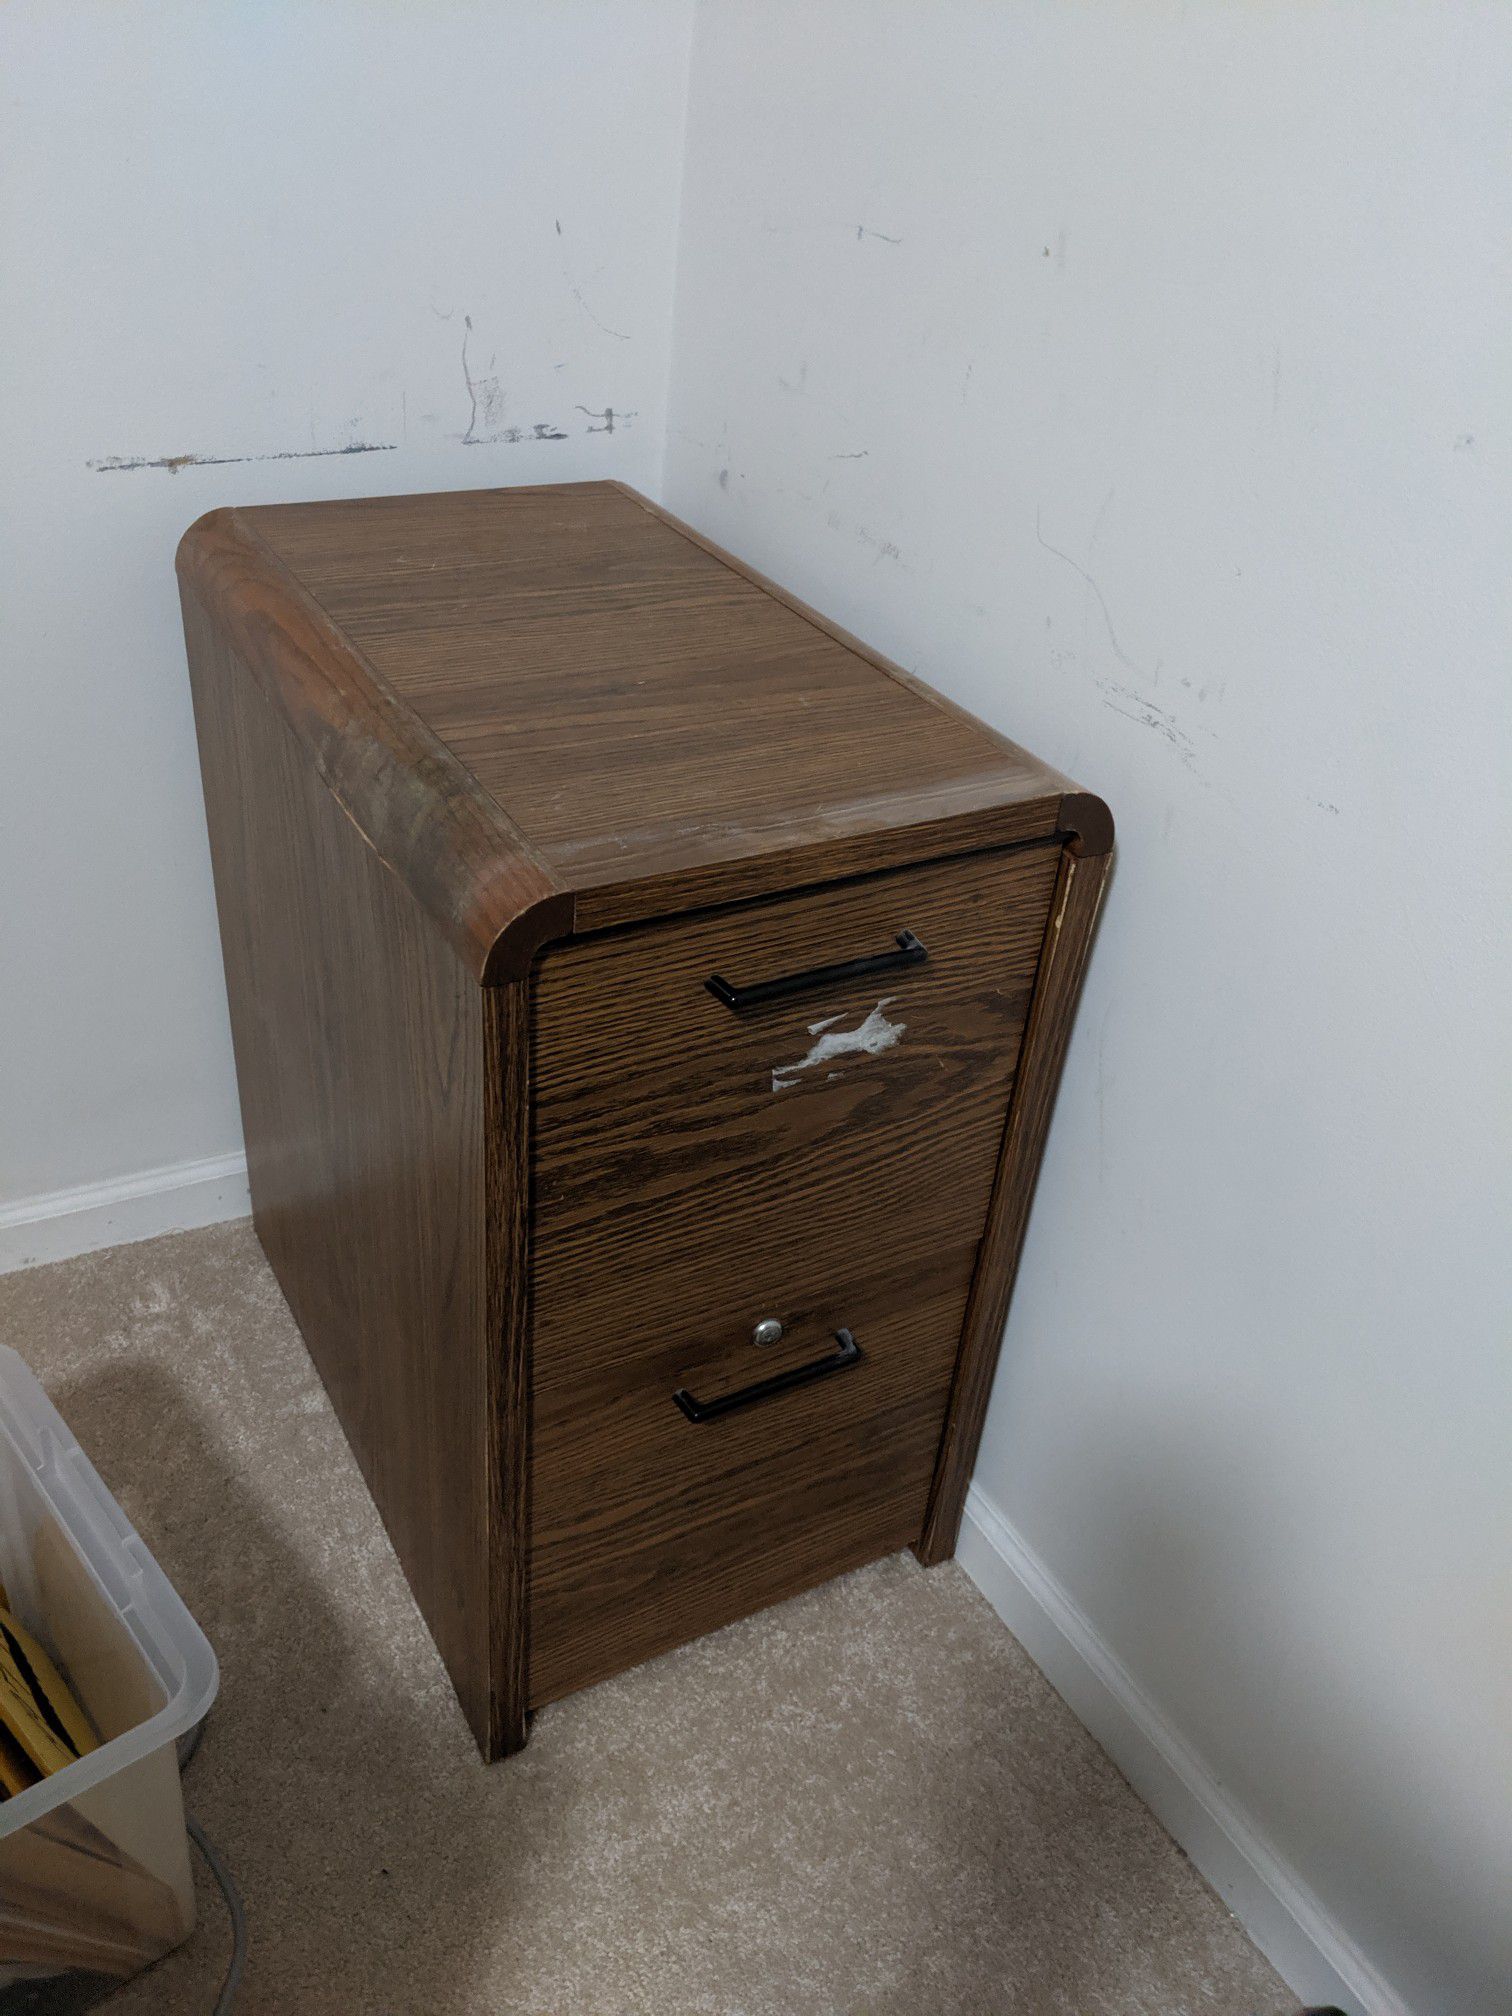 Very heavy, well made file cabinet. 2 fully functional drawers. Some wear and tear and little water damage on the top.